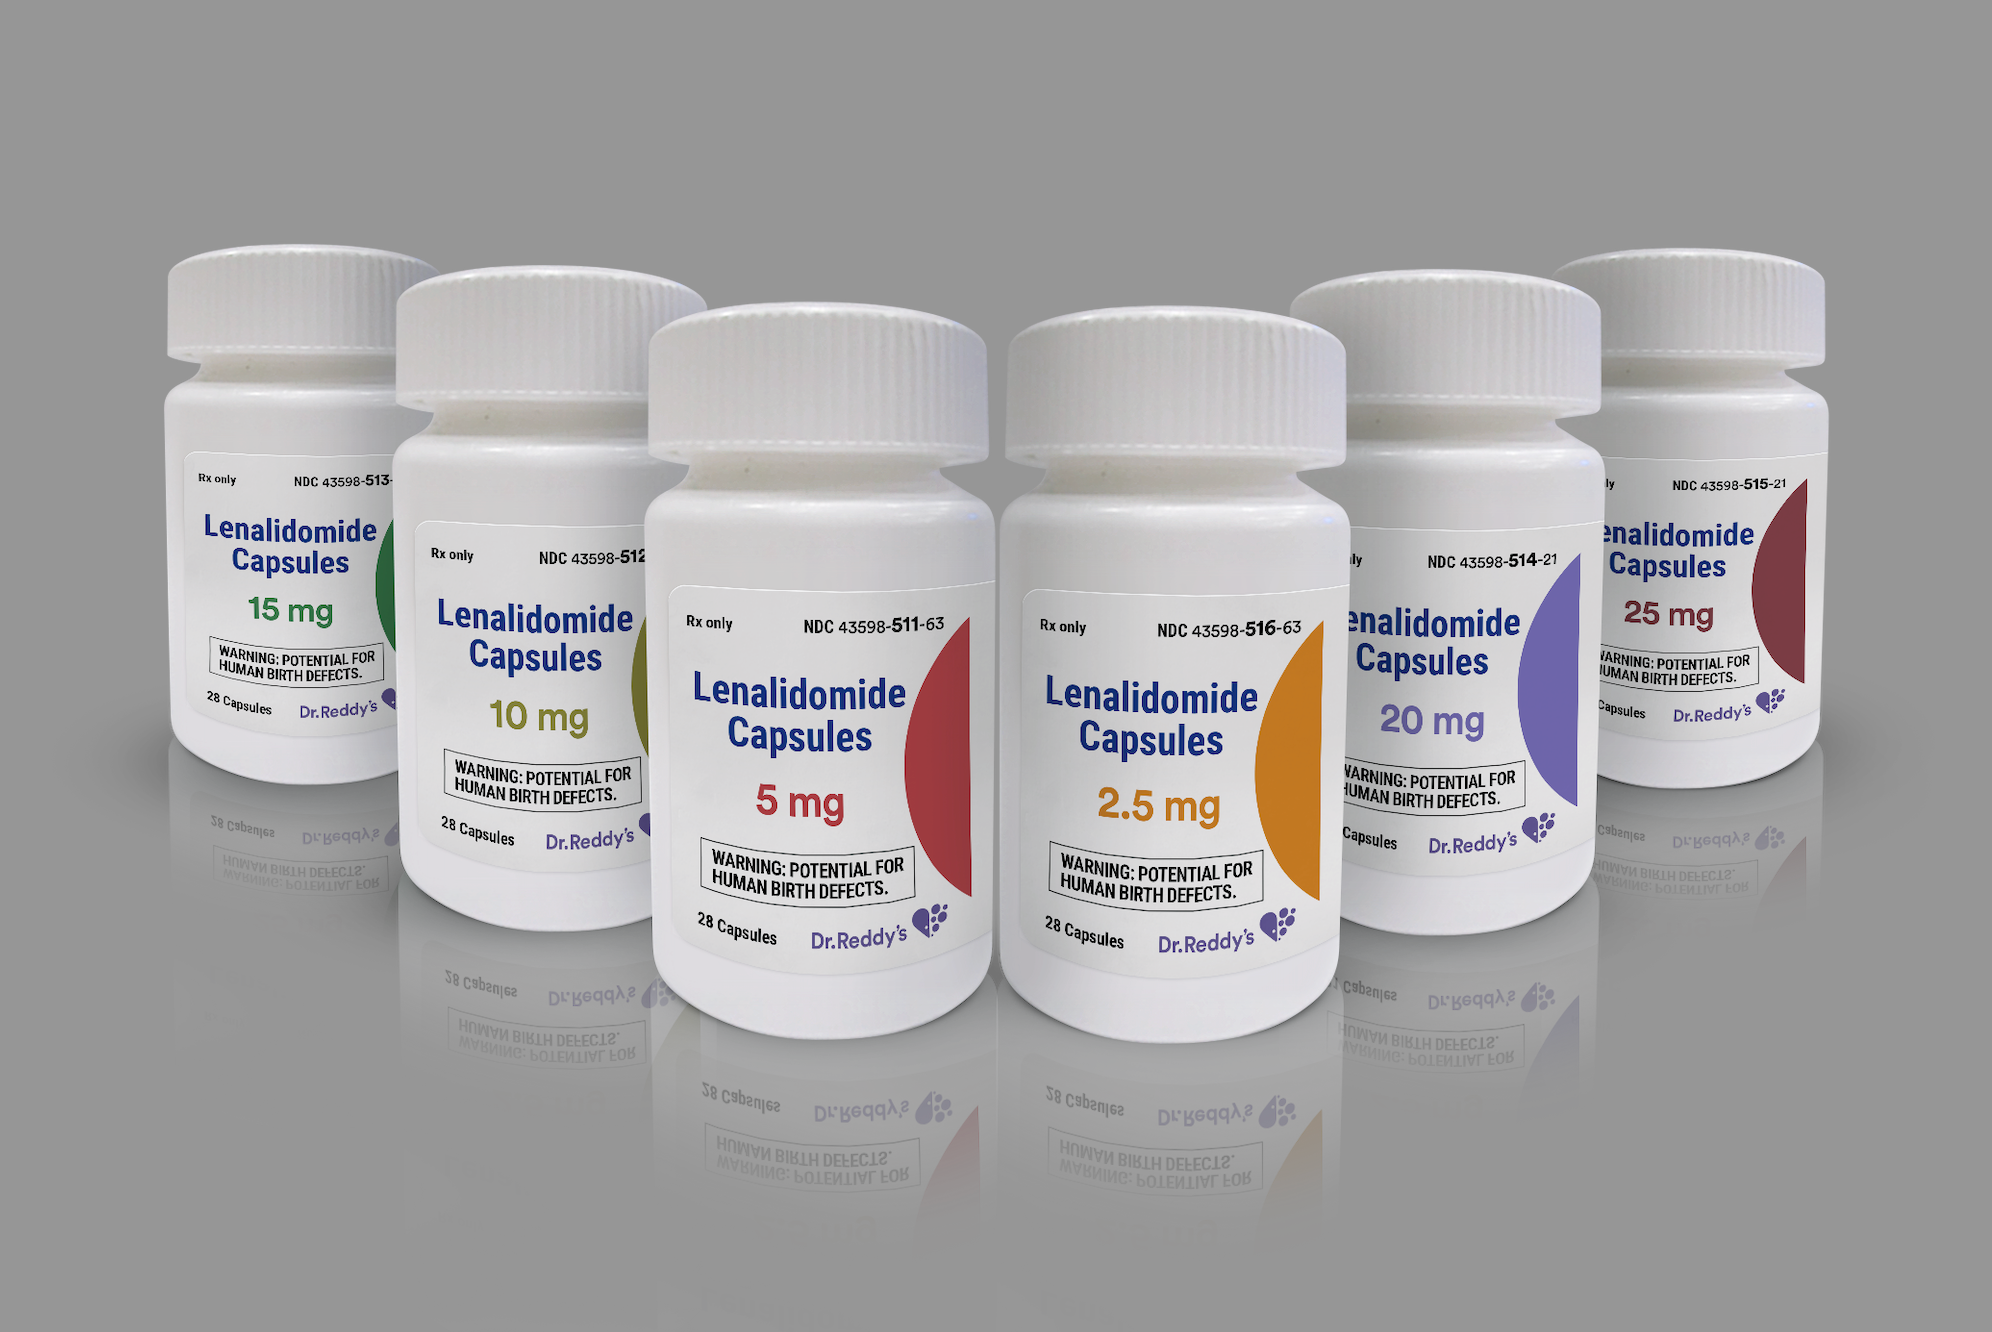 Dr. Reddy's Laboratories announces the launch of Lenalidomide Capsules in the U.S. with two of six strengths eligible for first-to-market, 180-day exclusivity